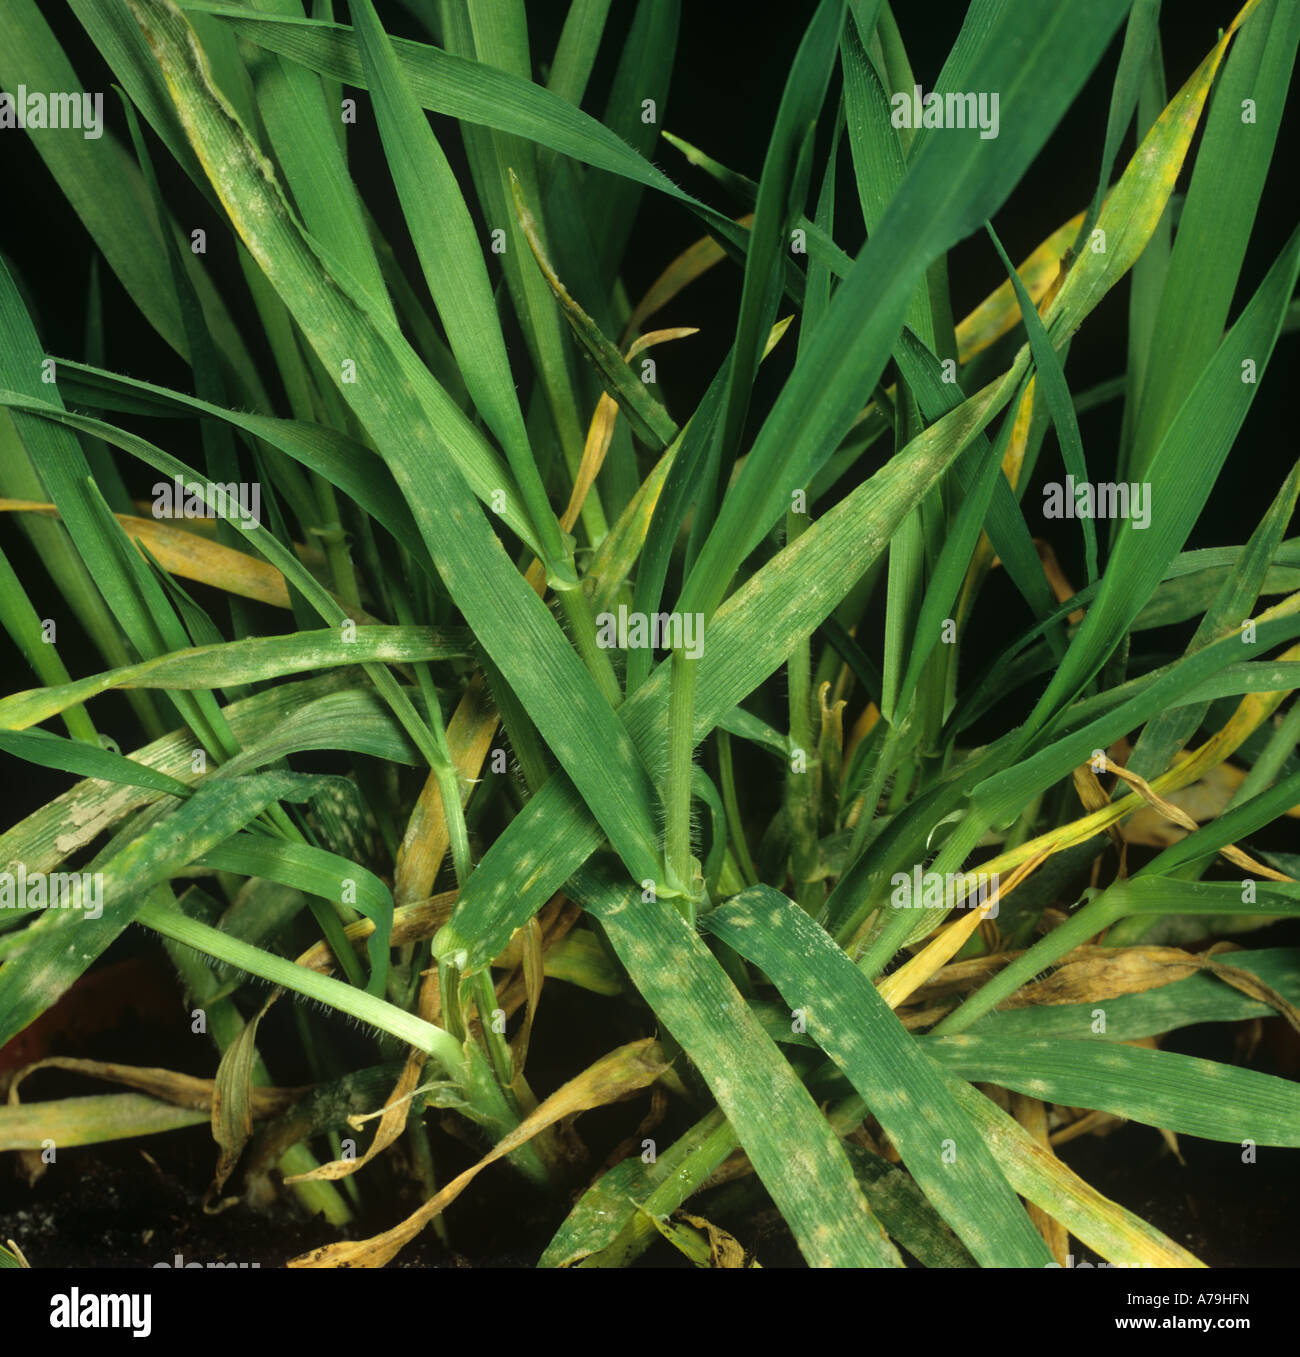 Powdery mildew (Blumeria graminis f.sp. hordei)disease infection on lower leaves of young barley plant Stock Photo